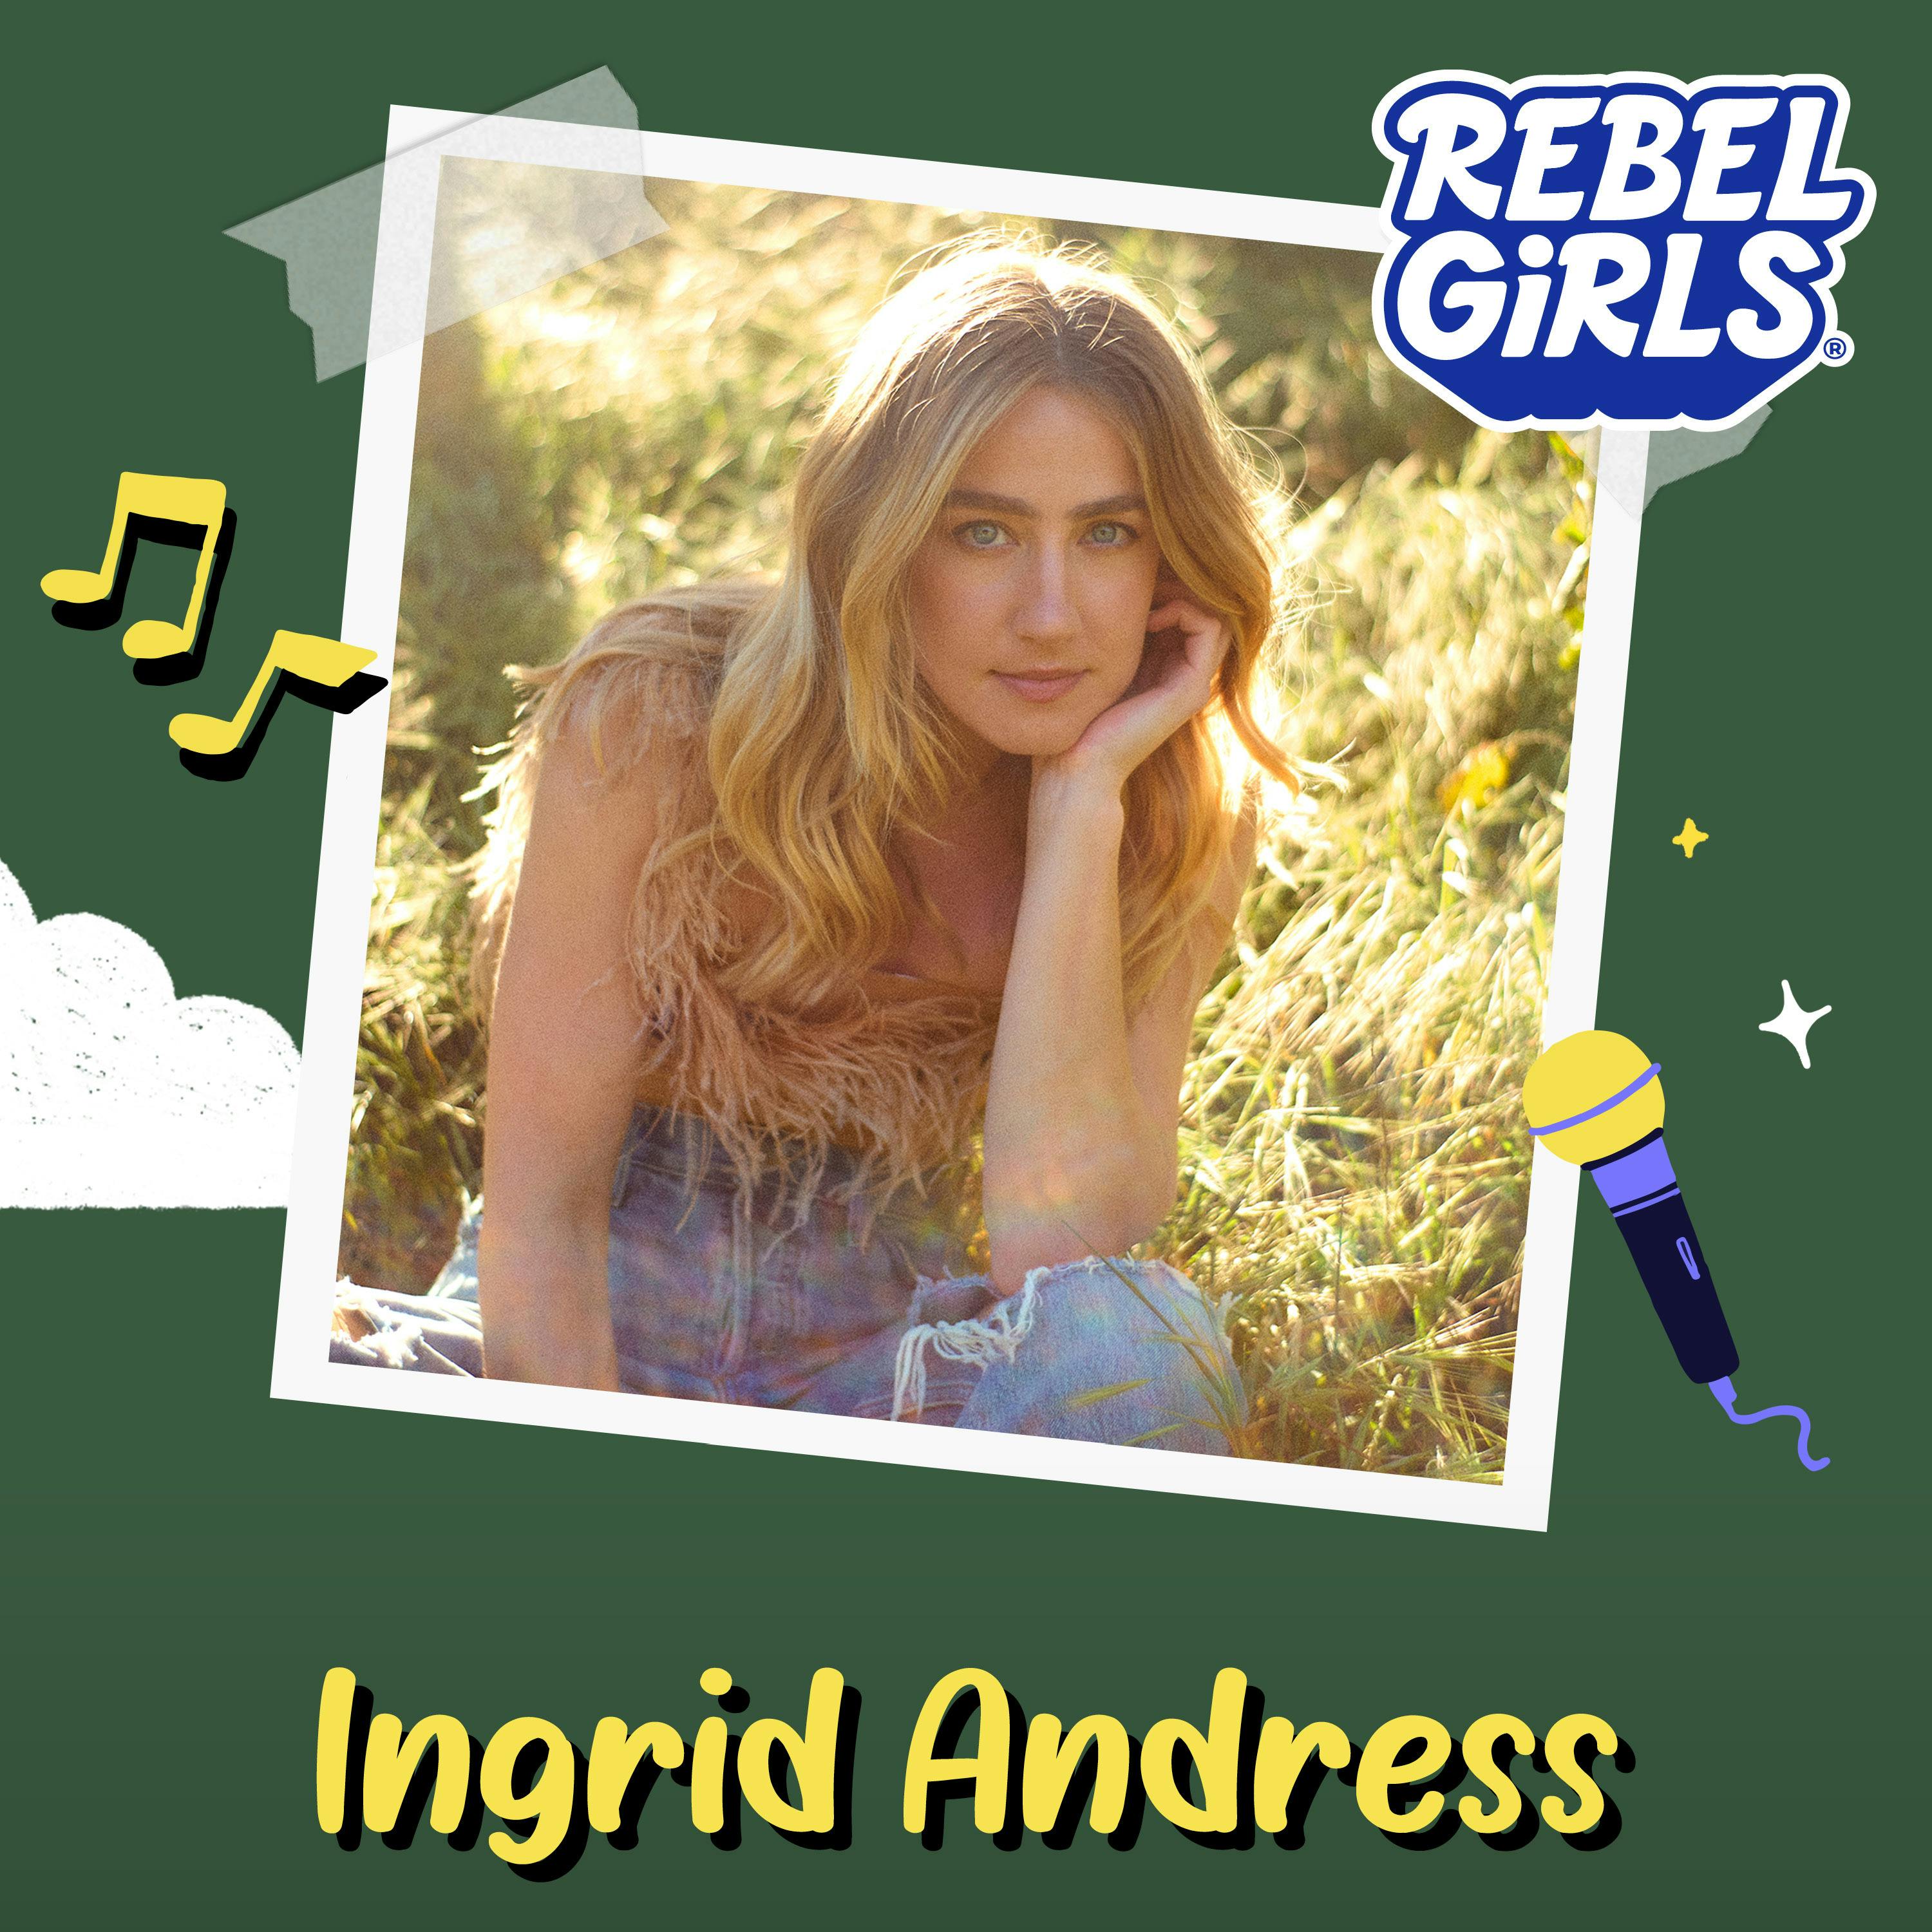 Get to Know Ingrid Andress